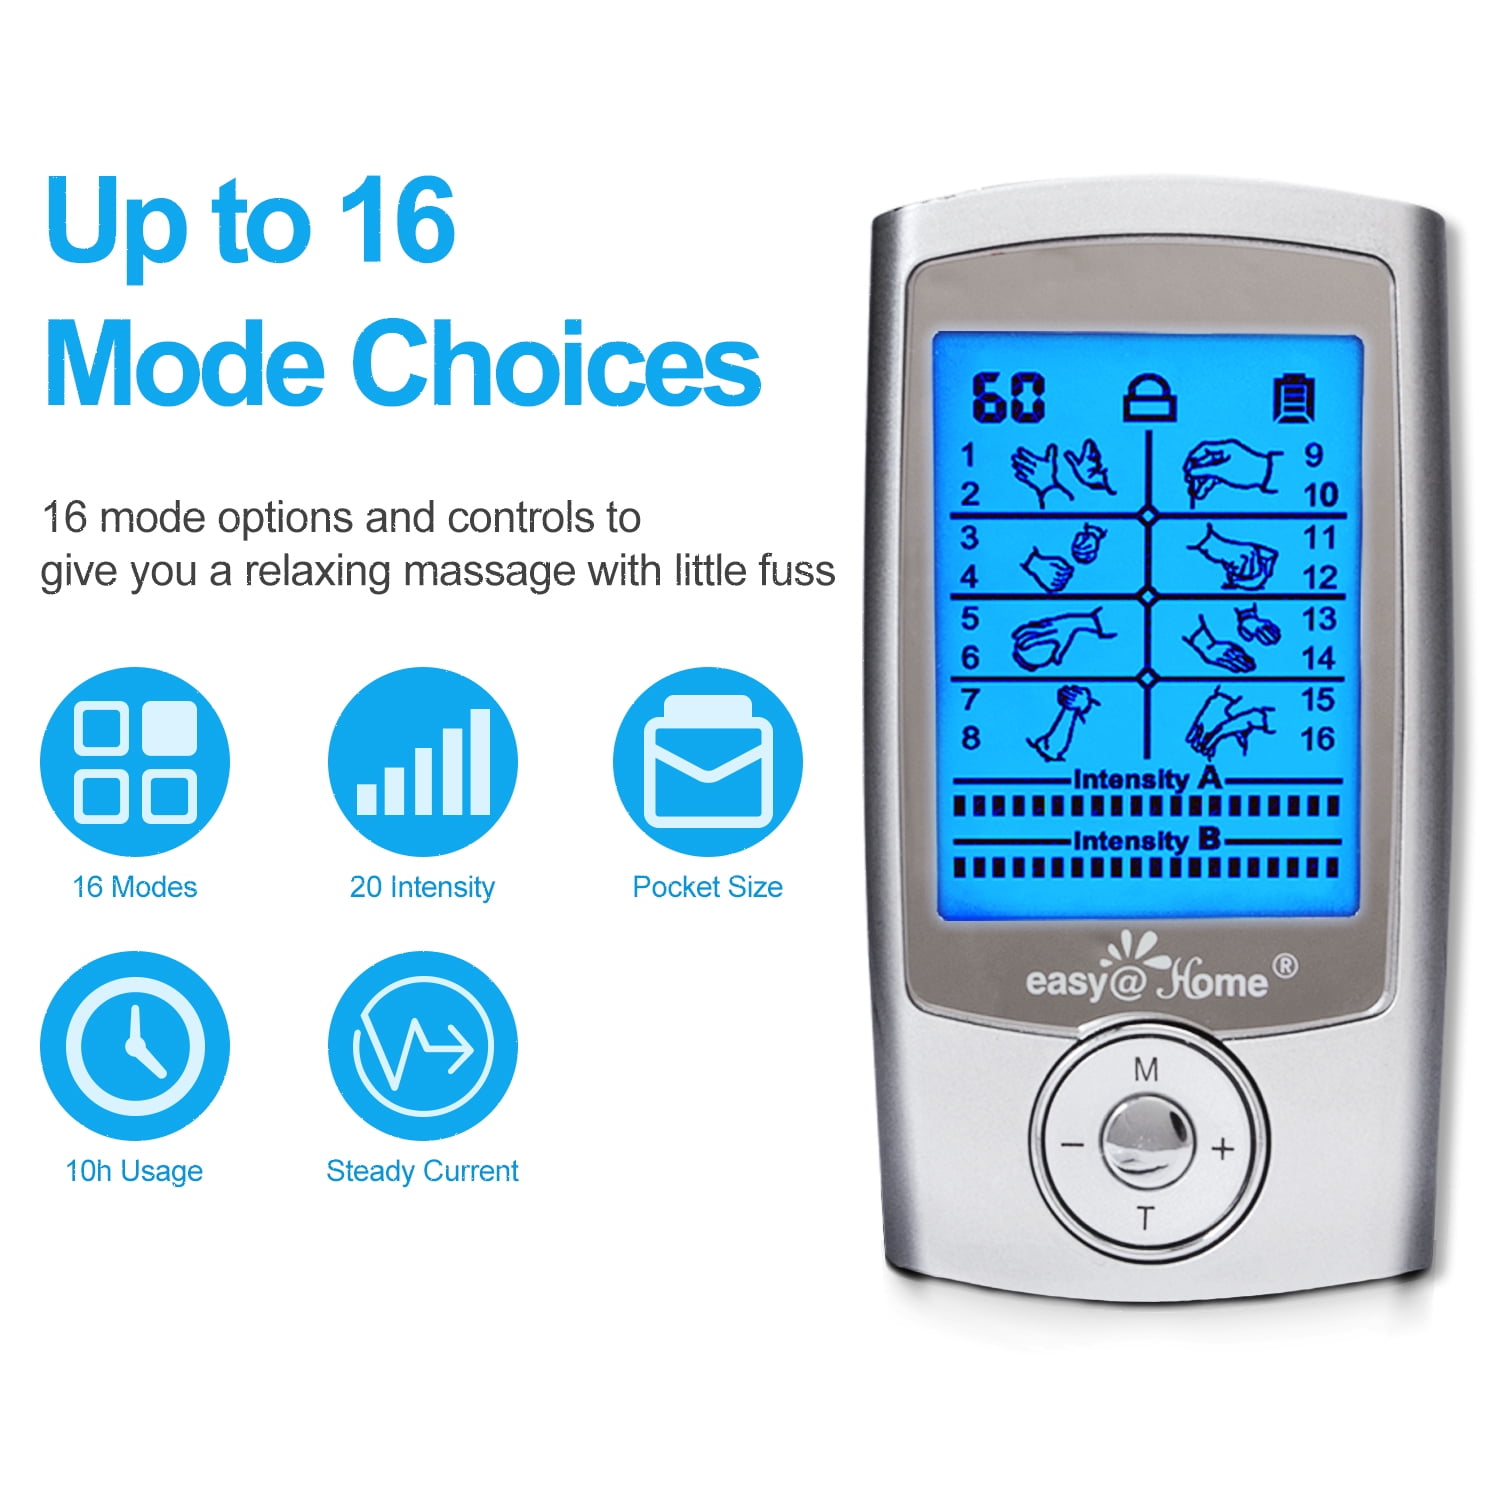 EasyHome TENS Unit Muscle Stimulator - Electronic Pulse Massager, 510K  Cleared, FSA Eligible OTC Home Use handheld Pain Relief therapy Device-Pain  Management Machine Gift for Mom Dad - EHE009